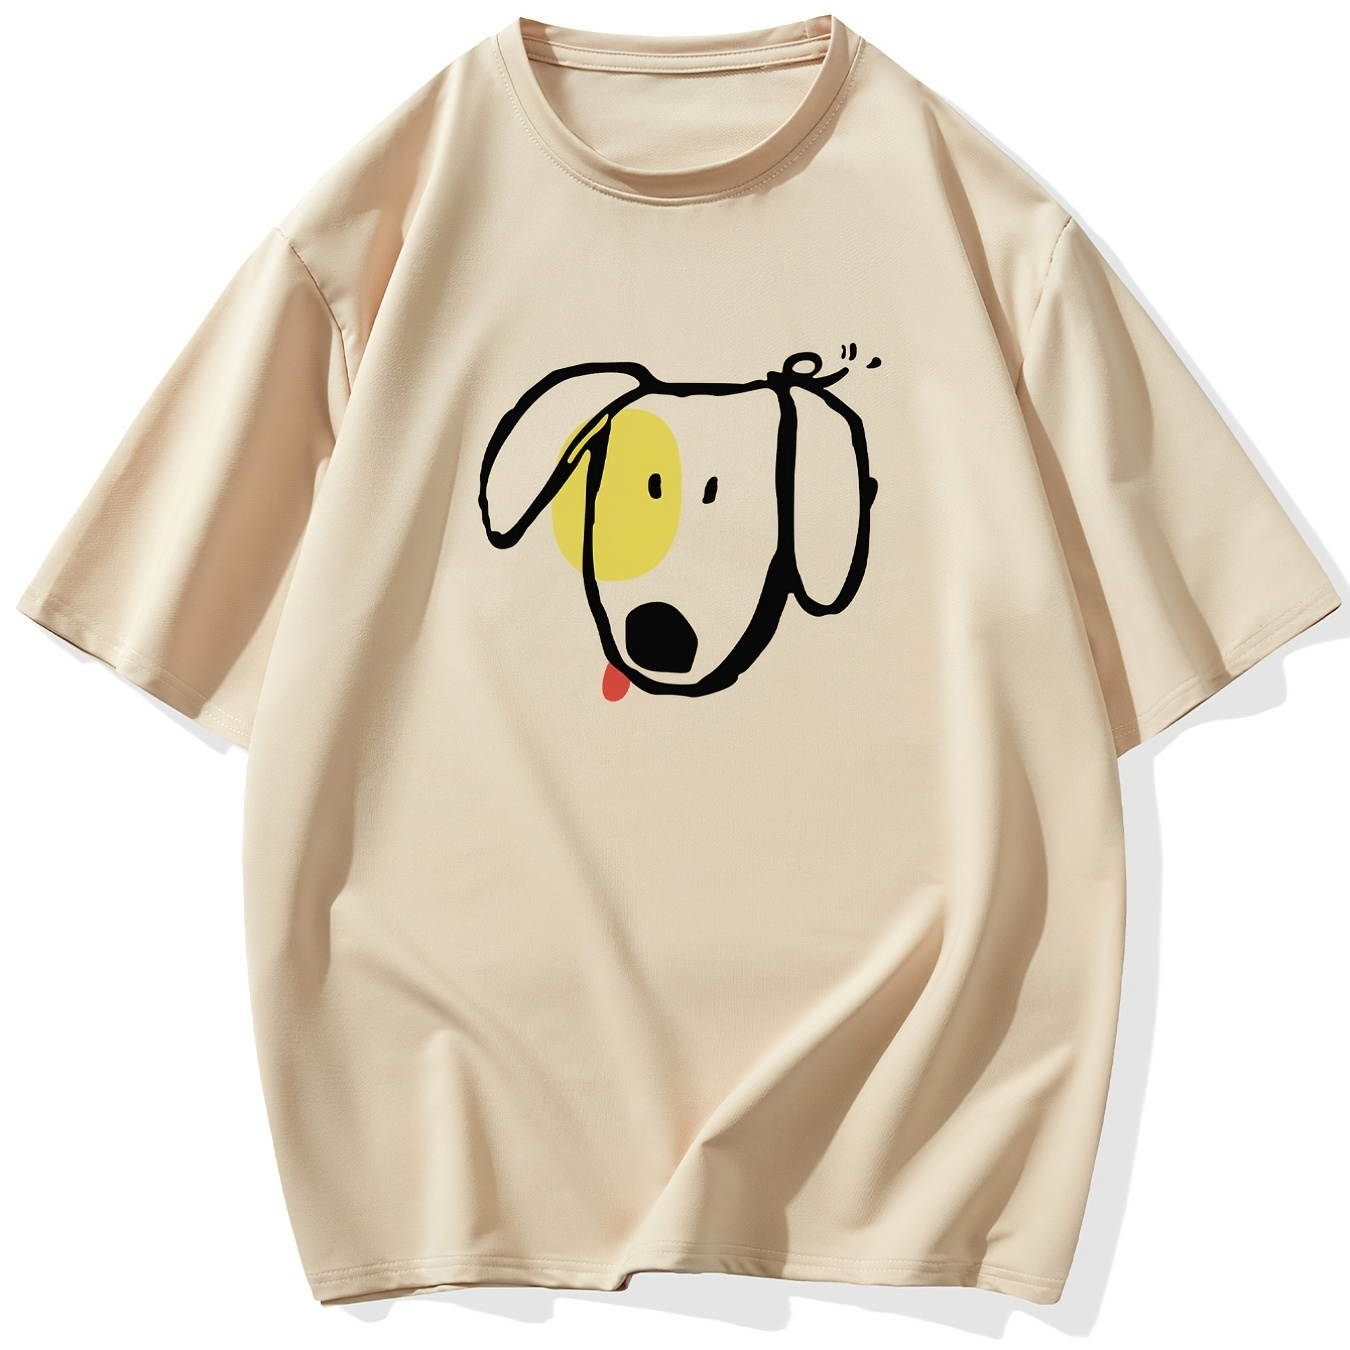 

Men's Plus Size Dog Print Stretch T-shirt, Oversized Short Sleeve Tops For Spring Summer, Causal Loose Clothing For Big And Tall Guys